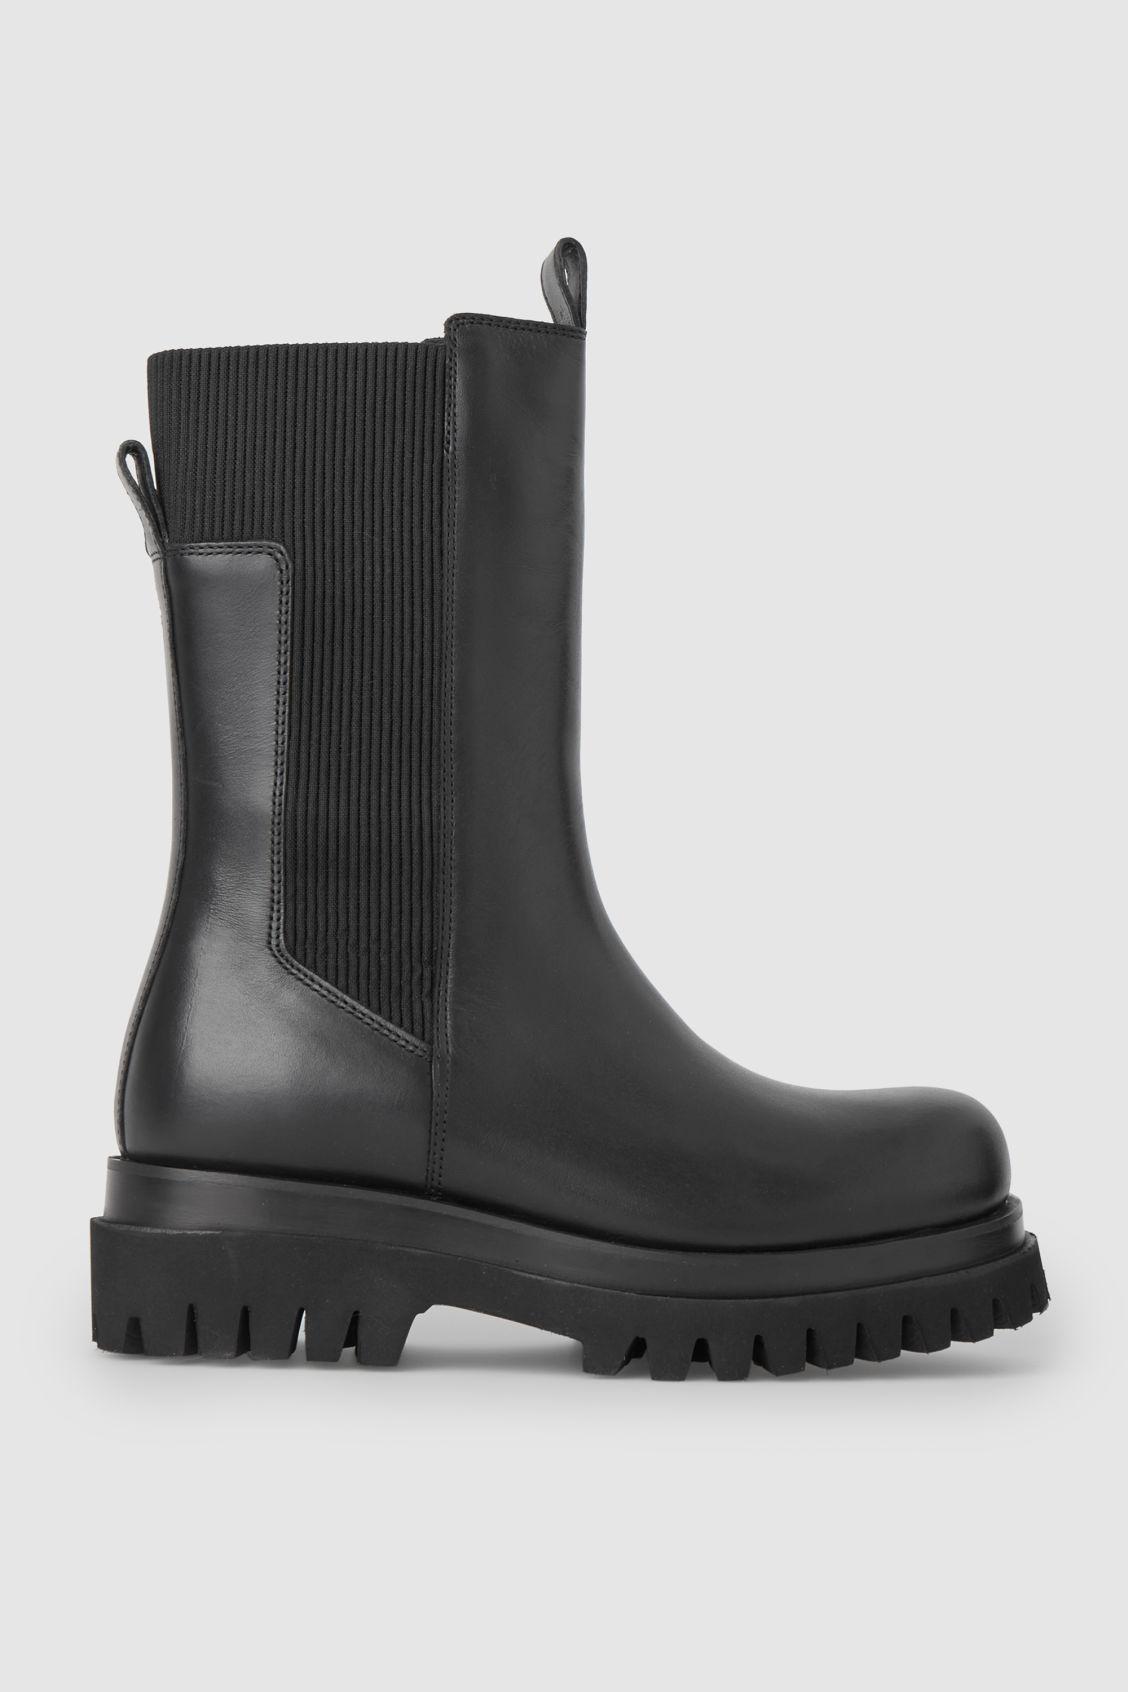 COS Chunky Leather Chelsea Boots in Black | Lyst